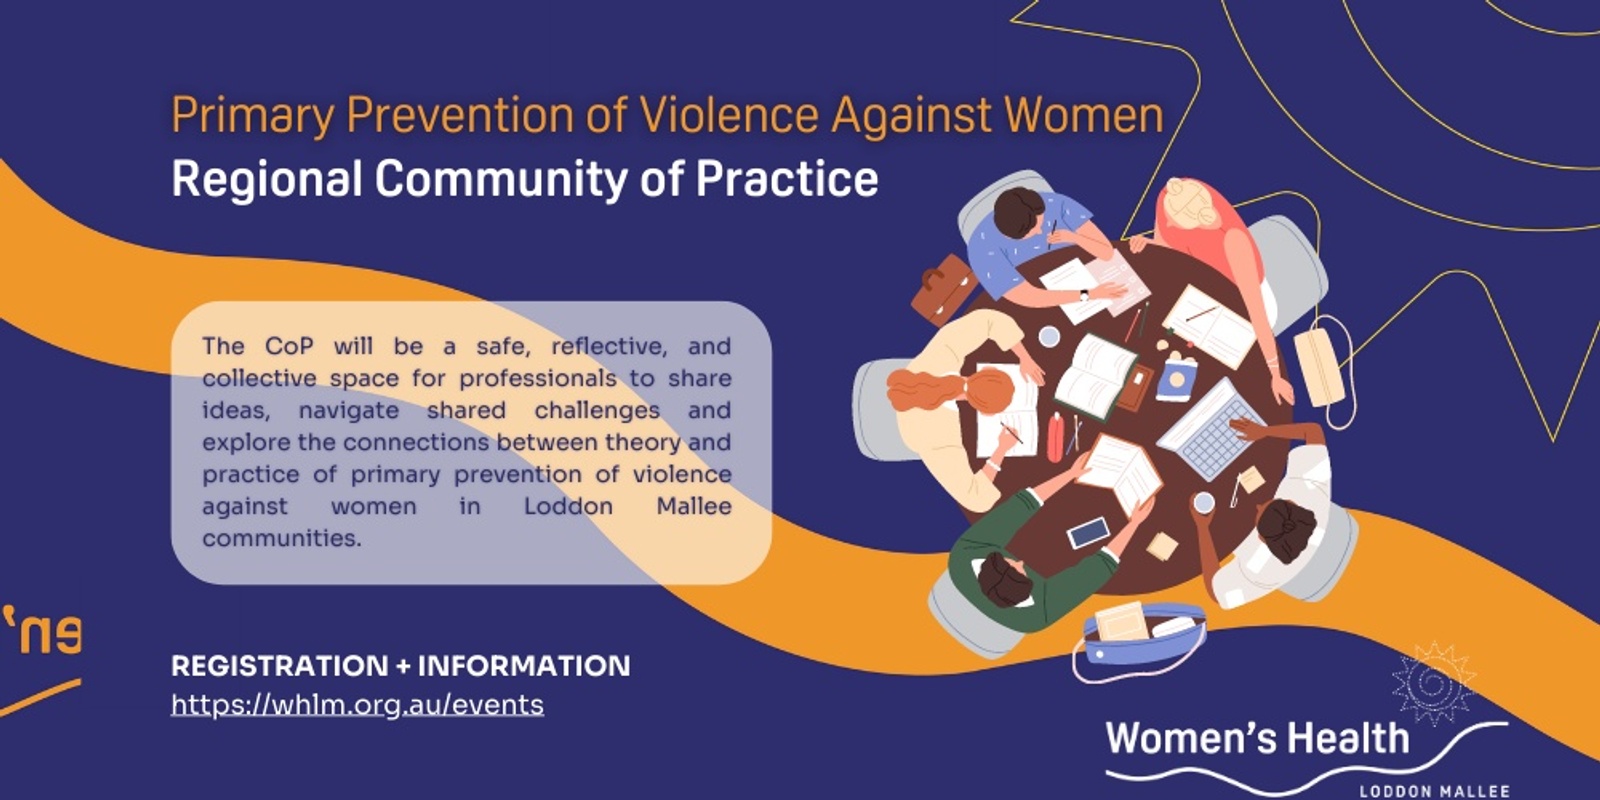 Community of Practice -Primary Prevention of Violence Against Women in the Loddon Mallee